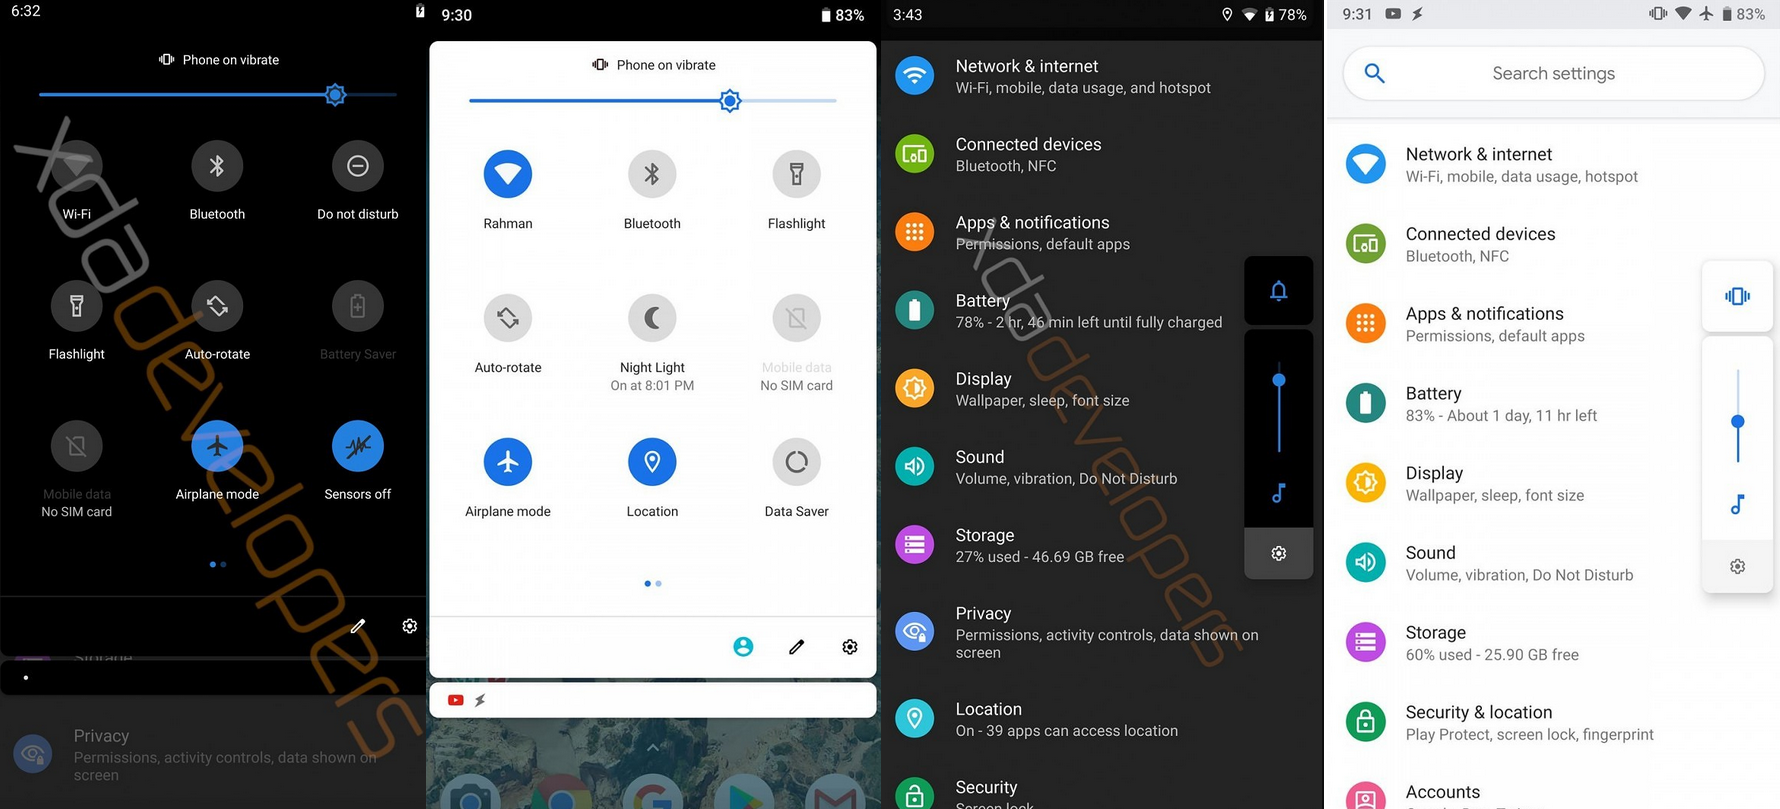 System-wide Dark Mode on Android Q compared with Light Mode on Android Pie - Android Q&#039;s system-wide Dark Mode could work with some third party apps